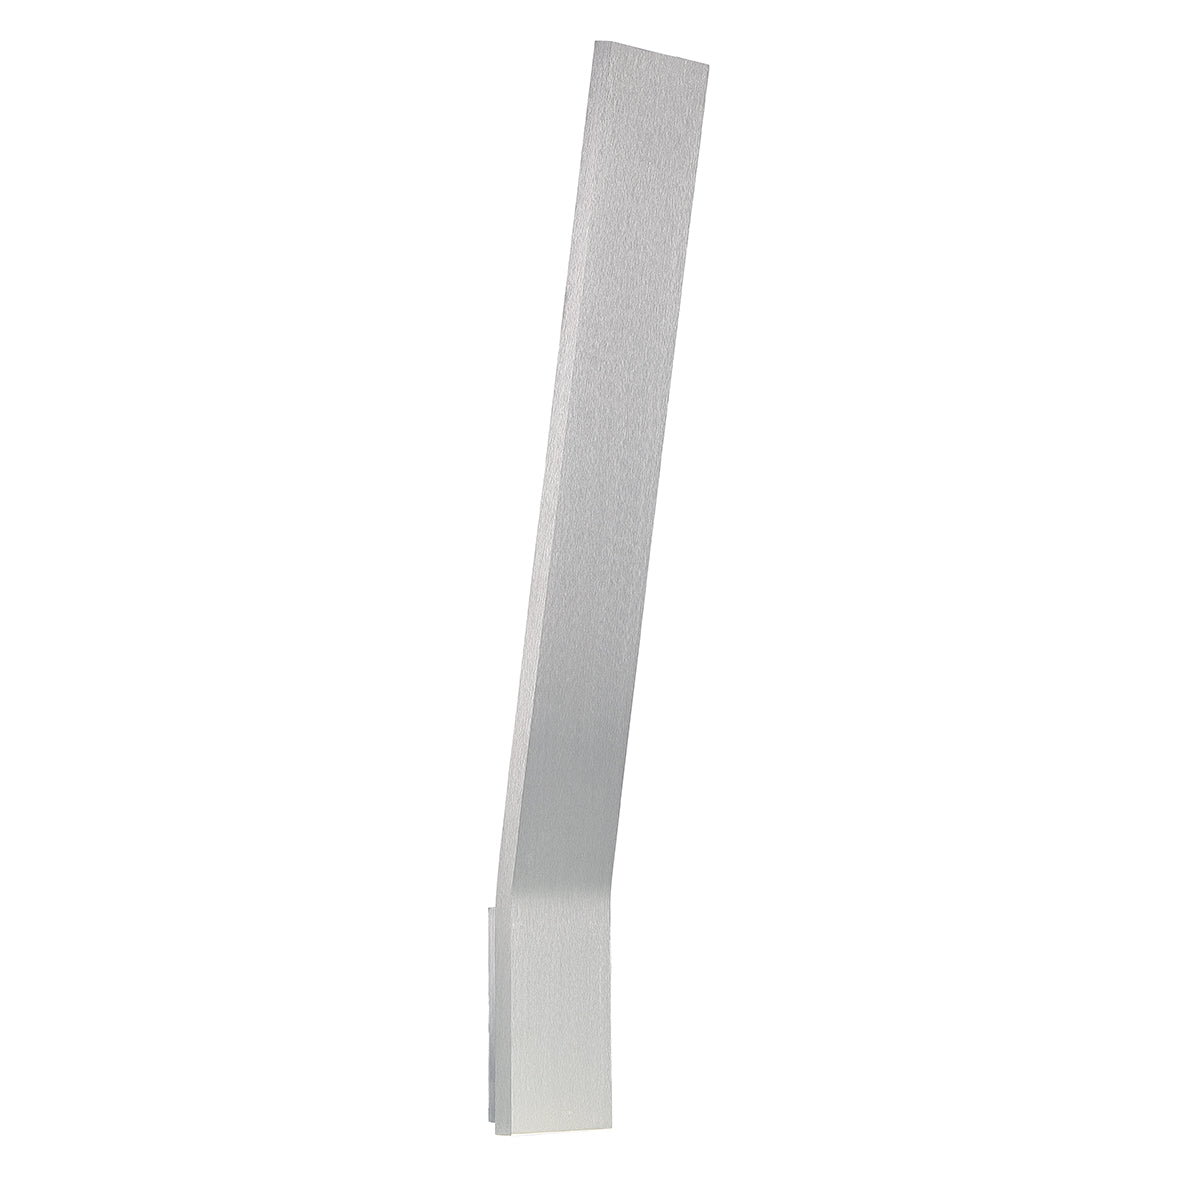 BLADE Sconce Aluminum INTEGRATED LED - WS-11522-AL | MODERN FORMS